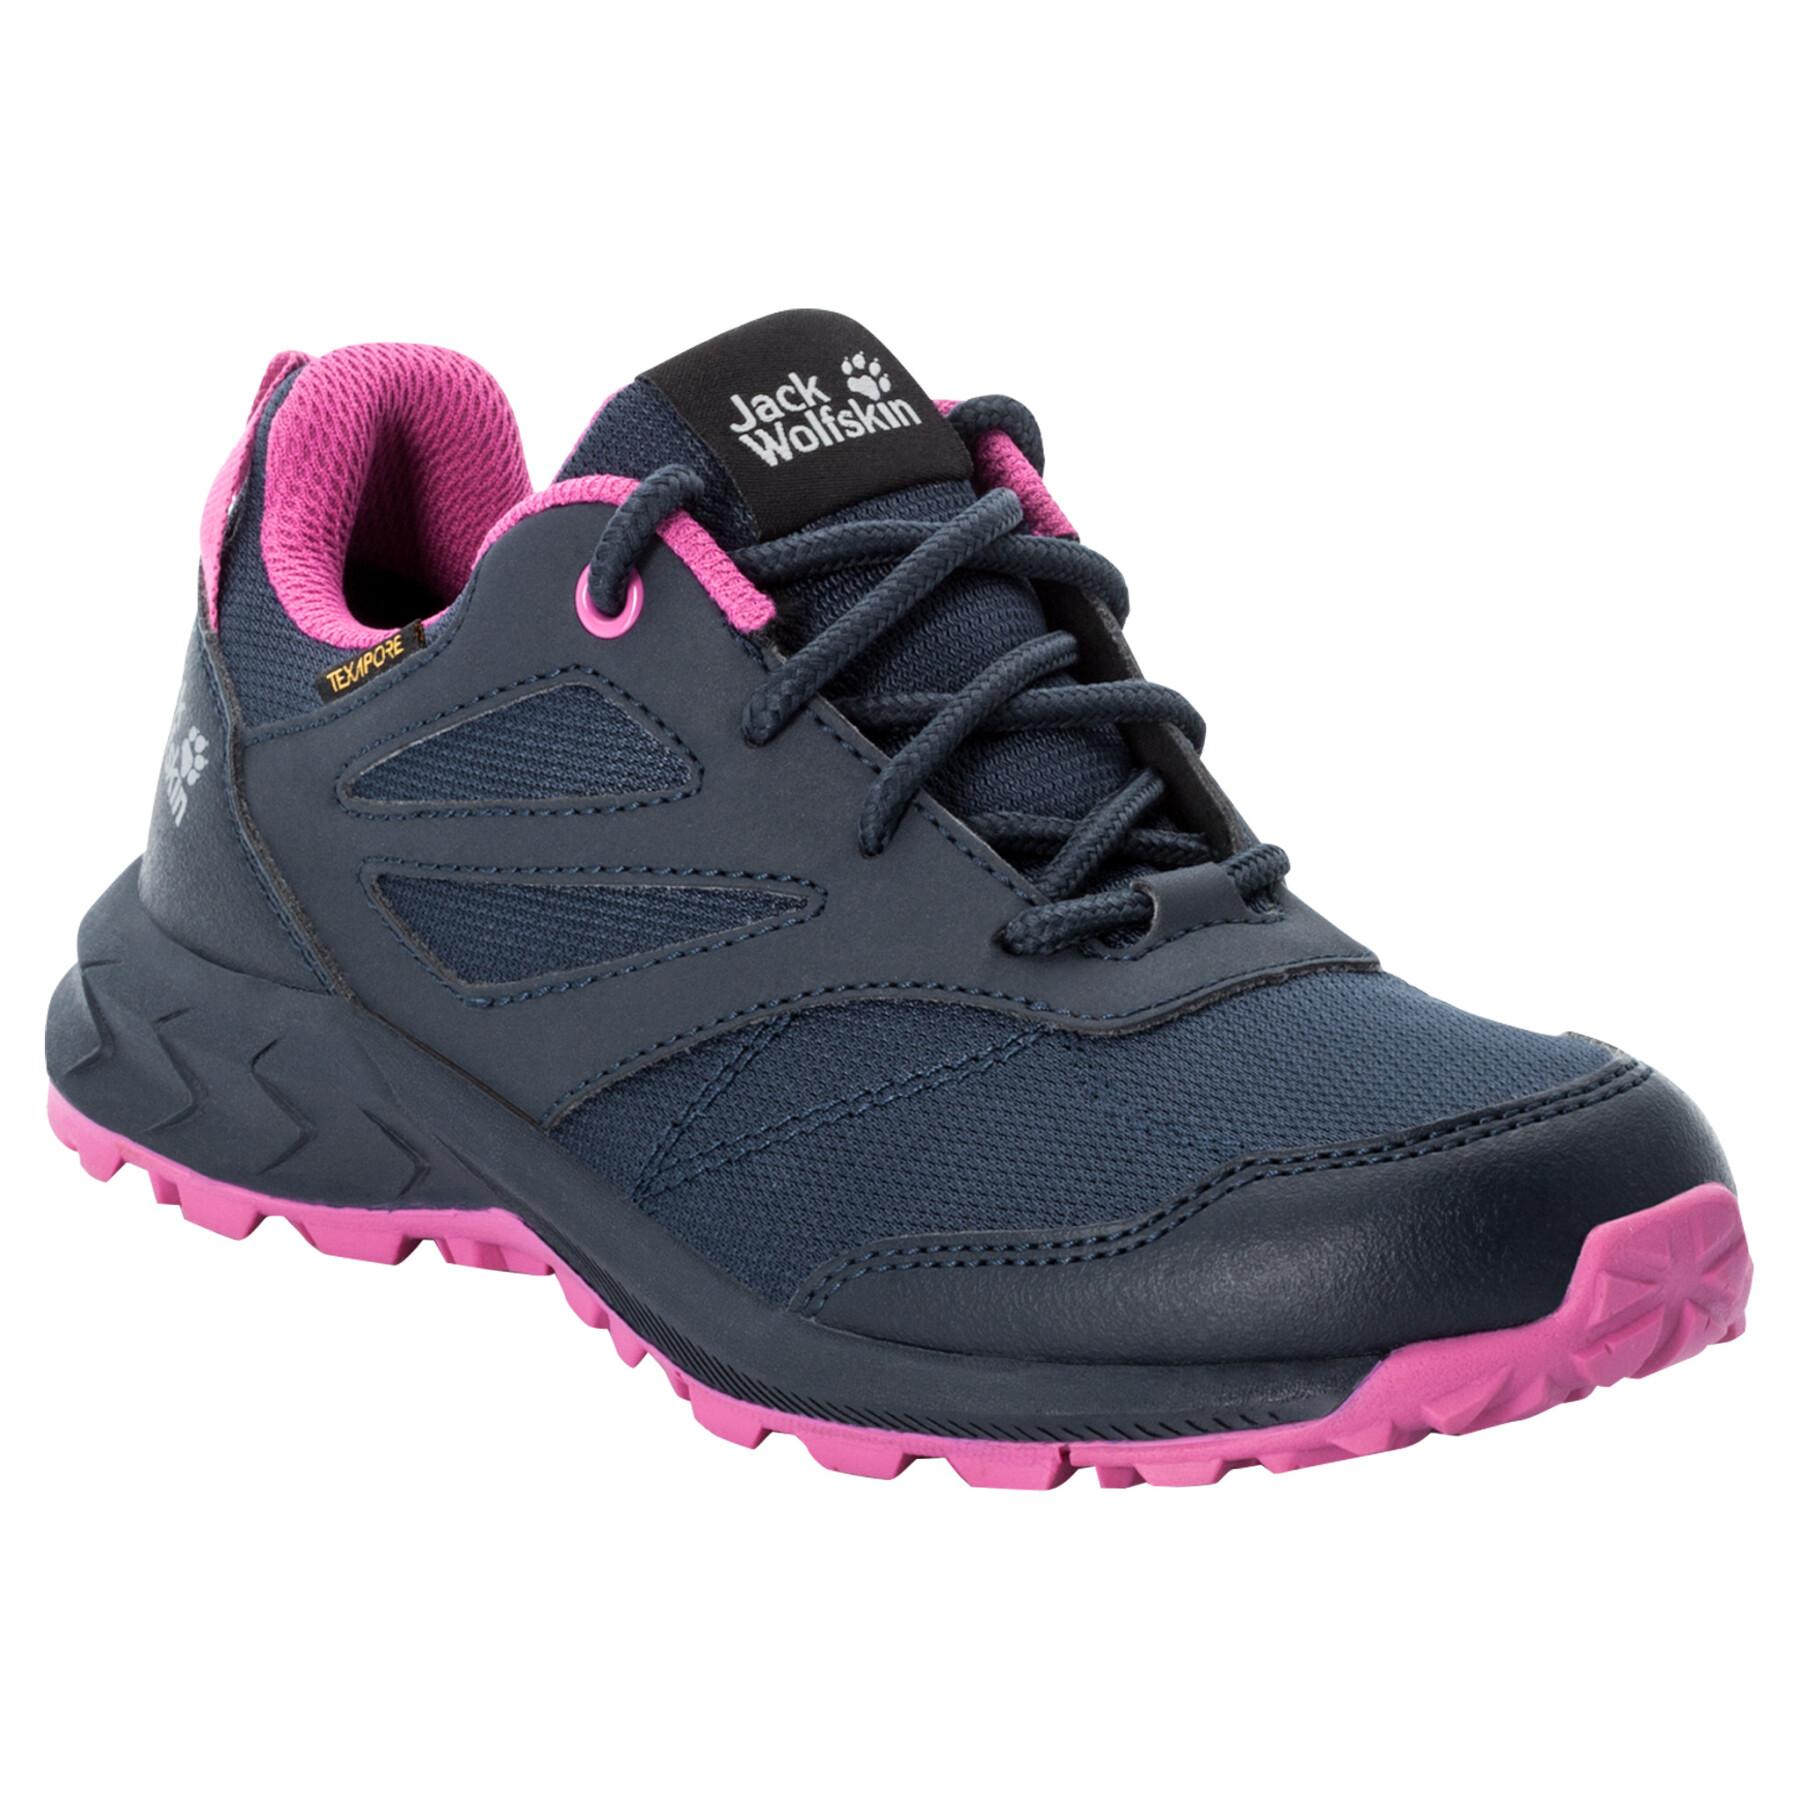 Chaussures enfant Jack Wolfskin woodland texapore low